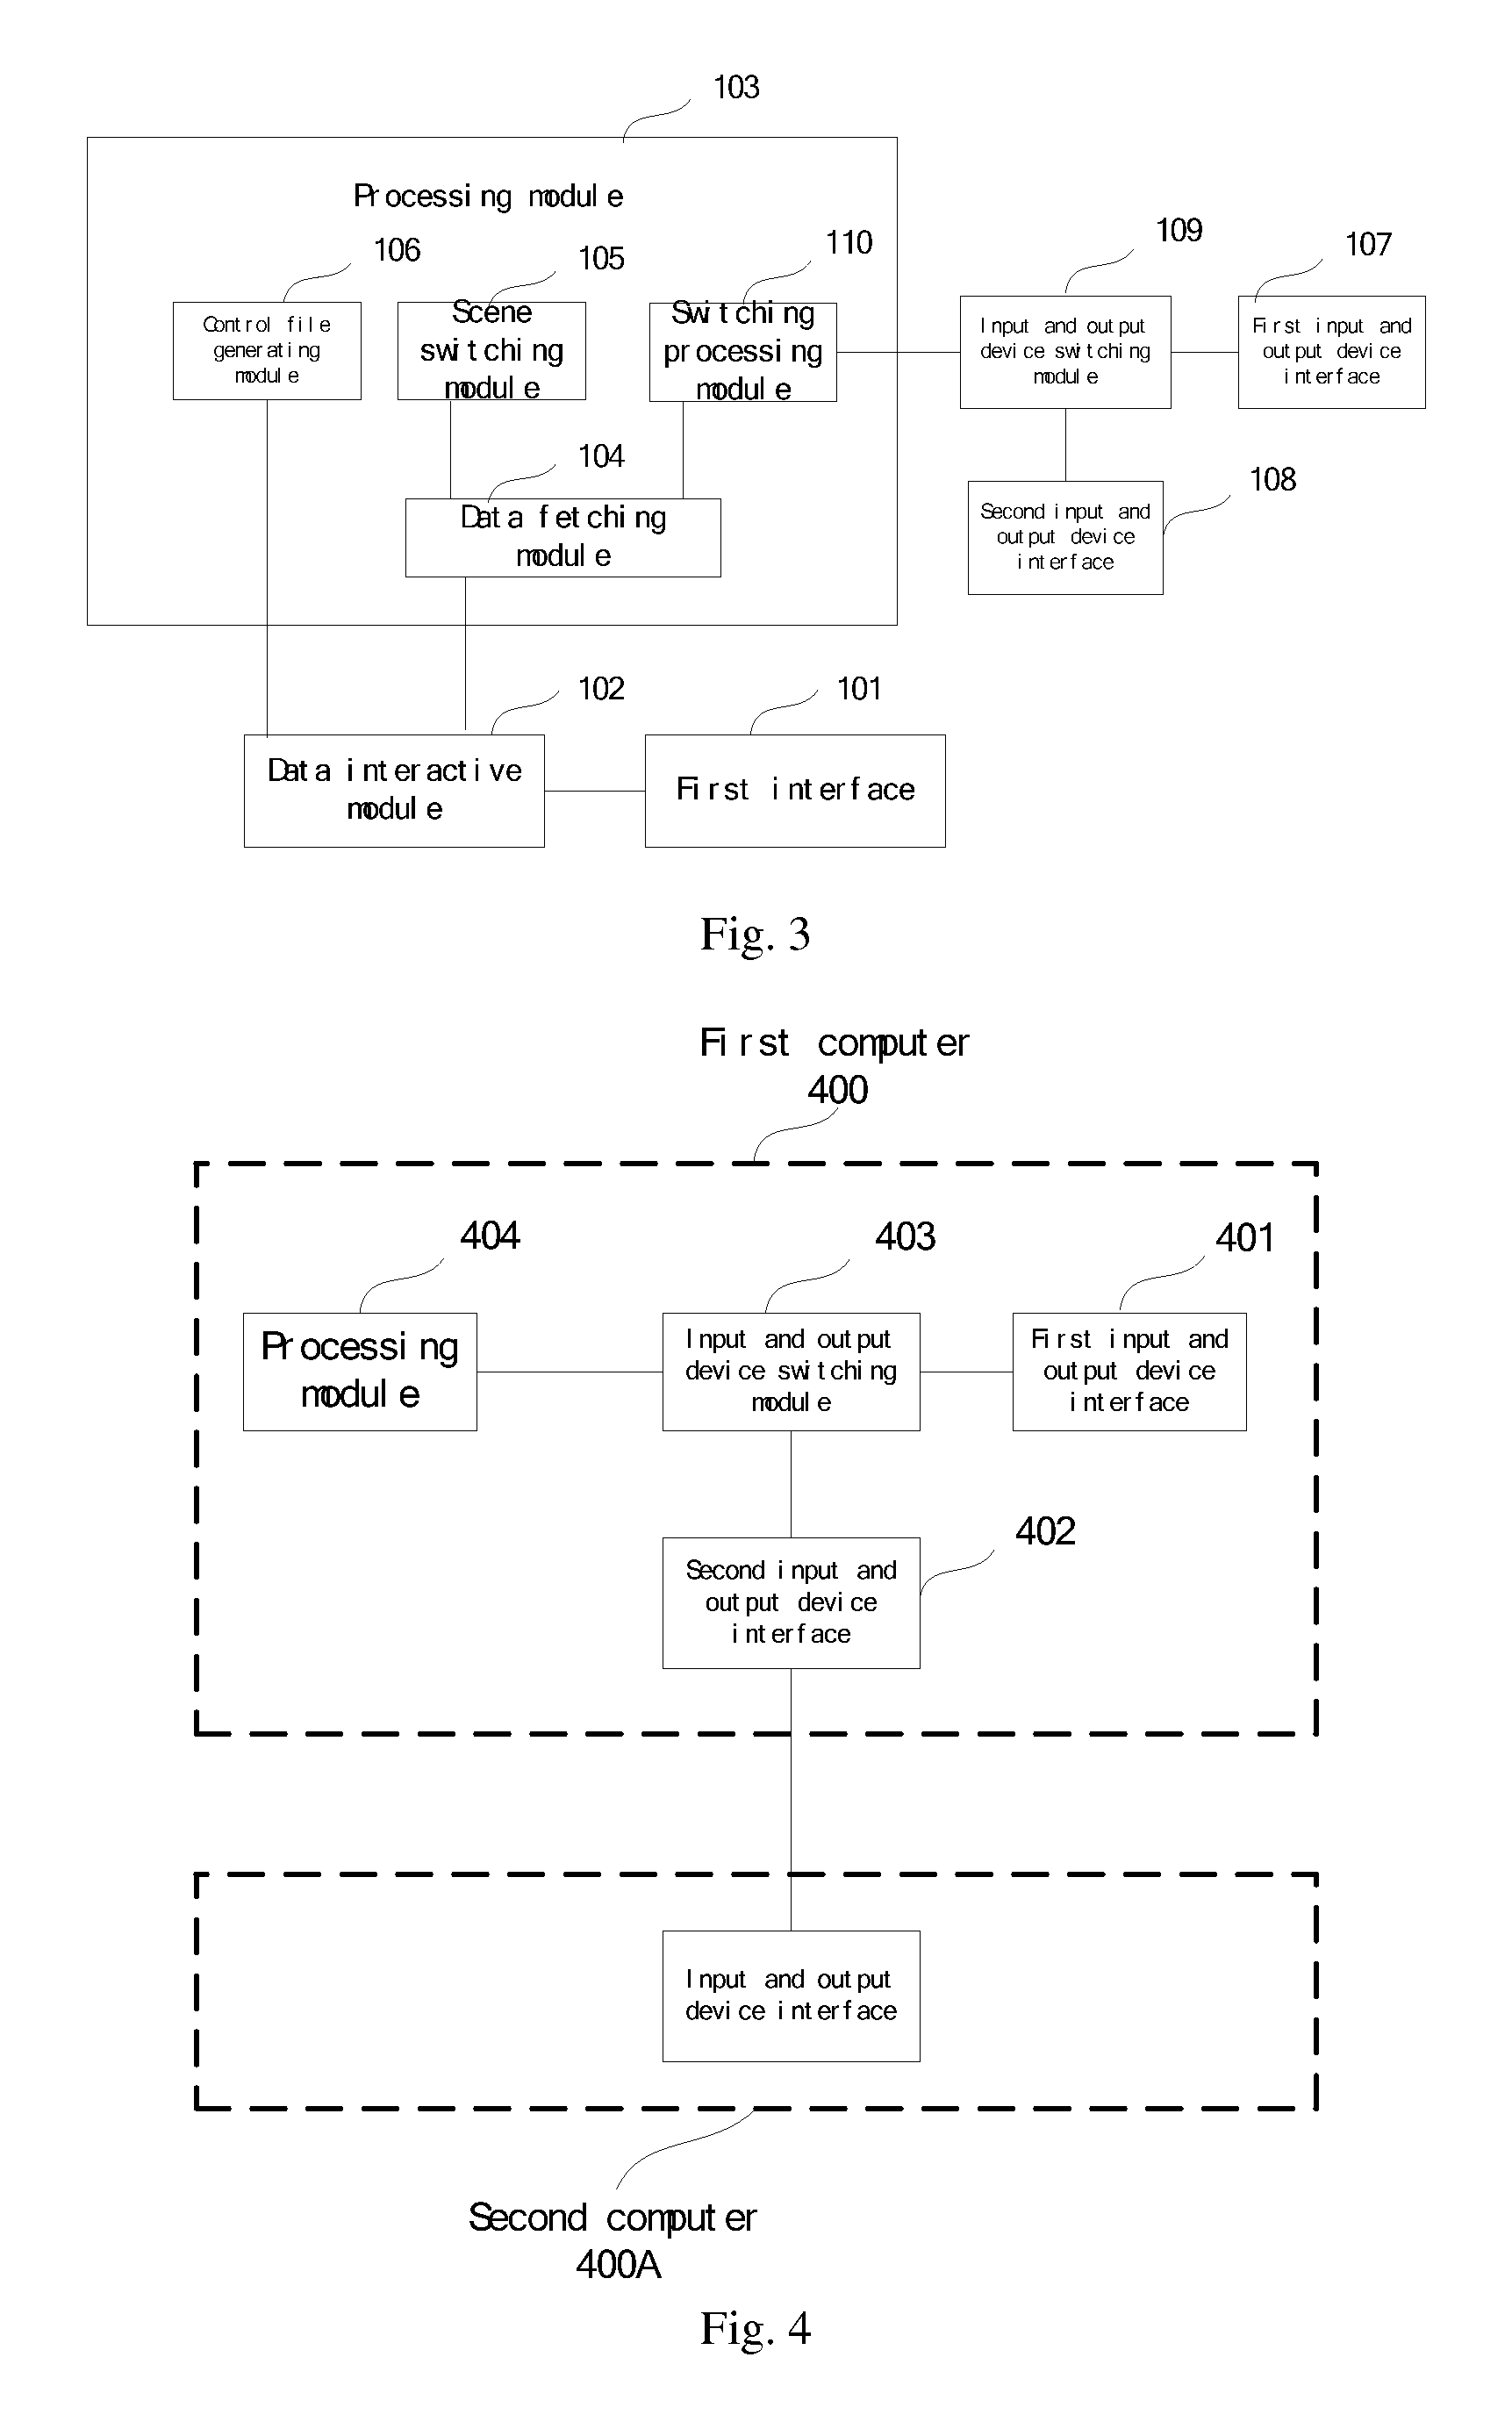 Computer and method to realize the coupling between computers